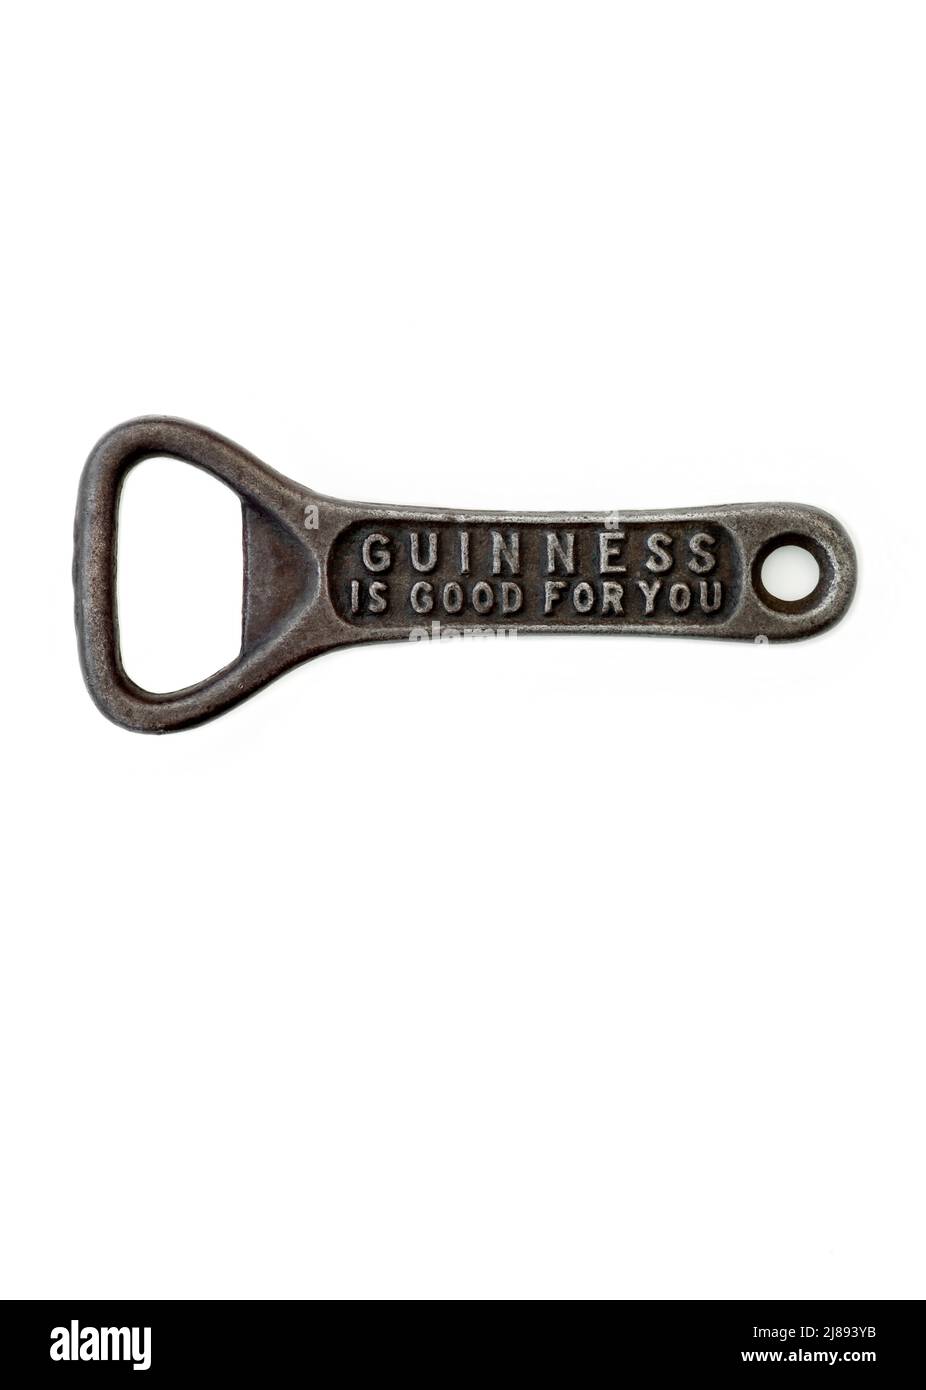 https://c8.alamy.com/comp/2J893YB/guinness-bottle-opener-with-the-caption-guinness-is-good-for-you-2J893YB.jpg